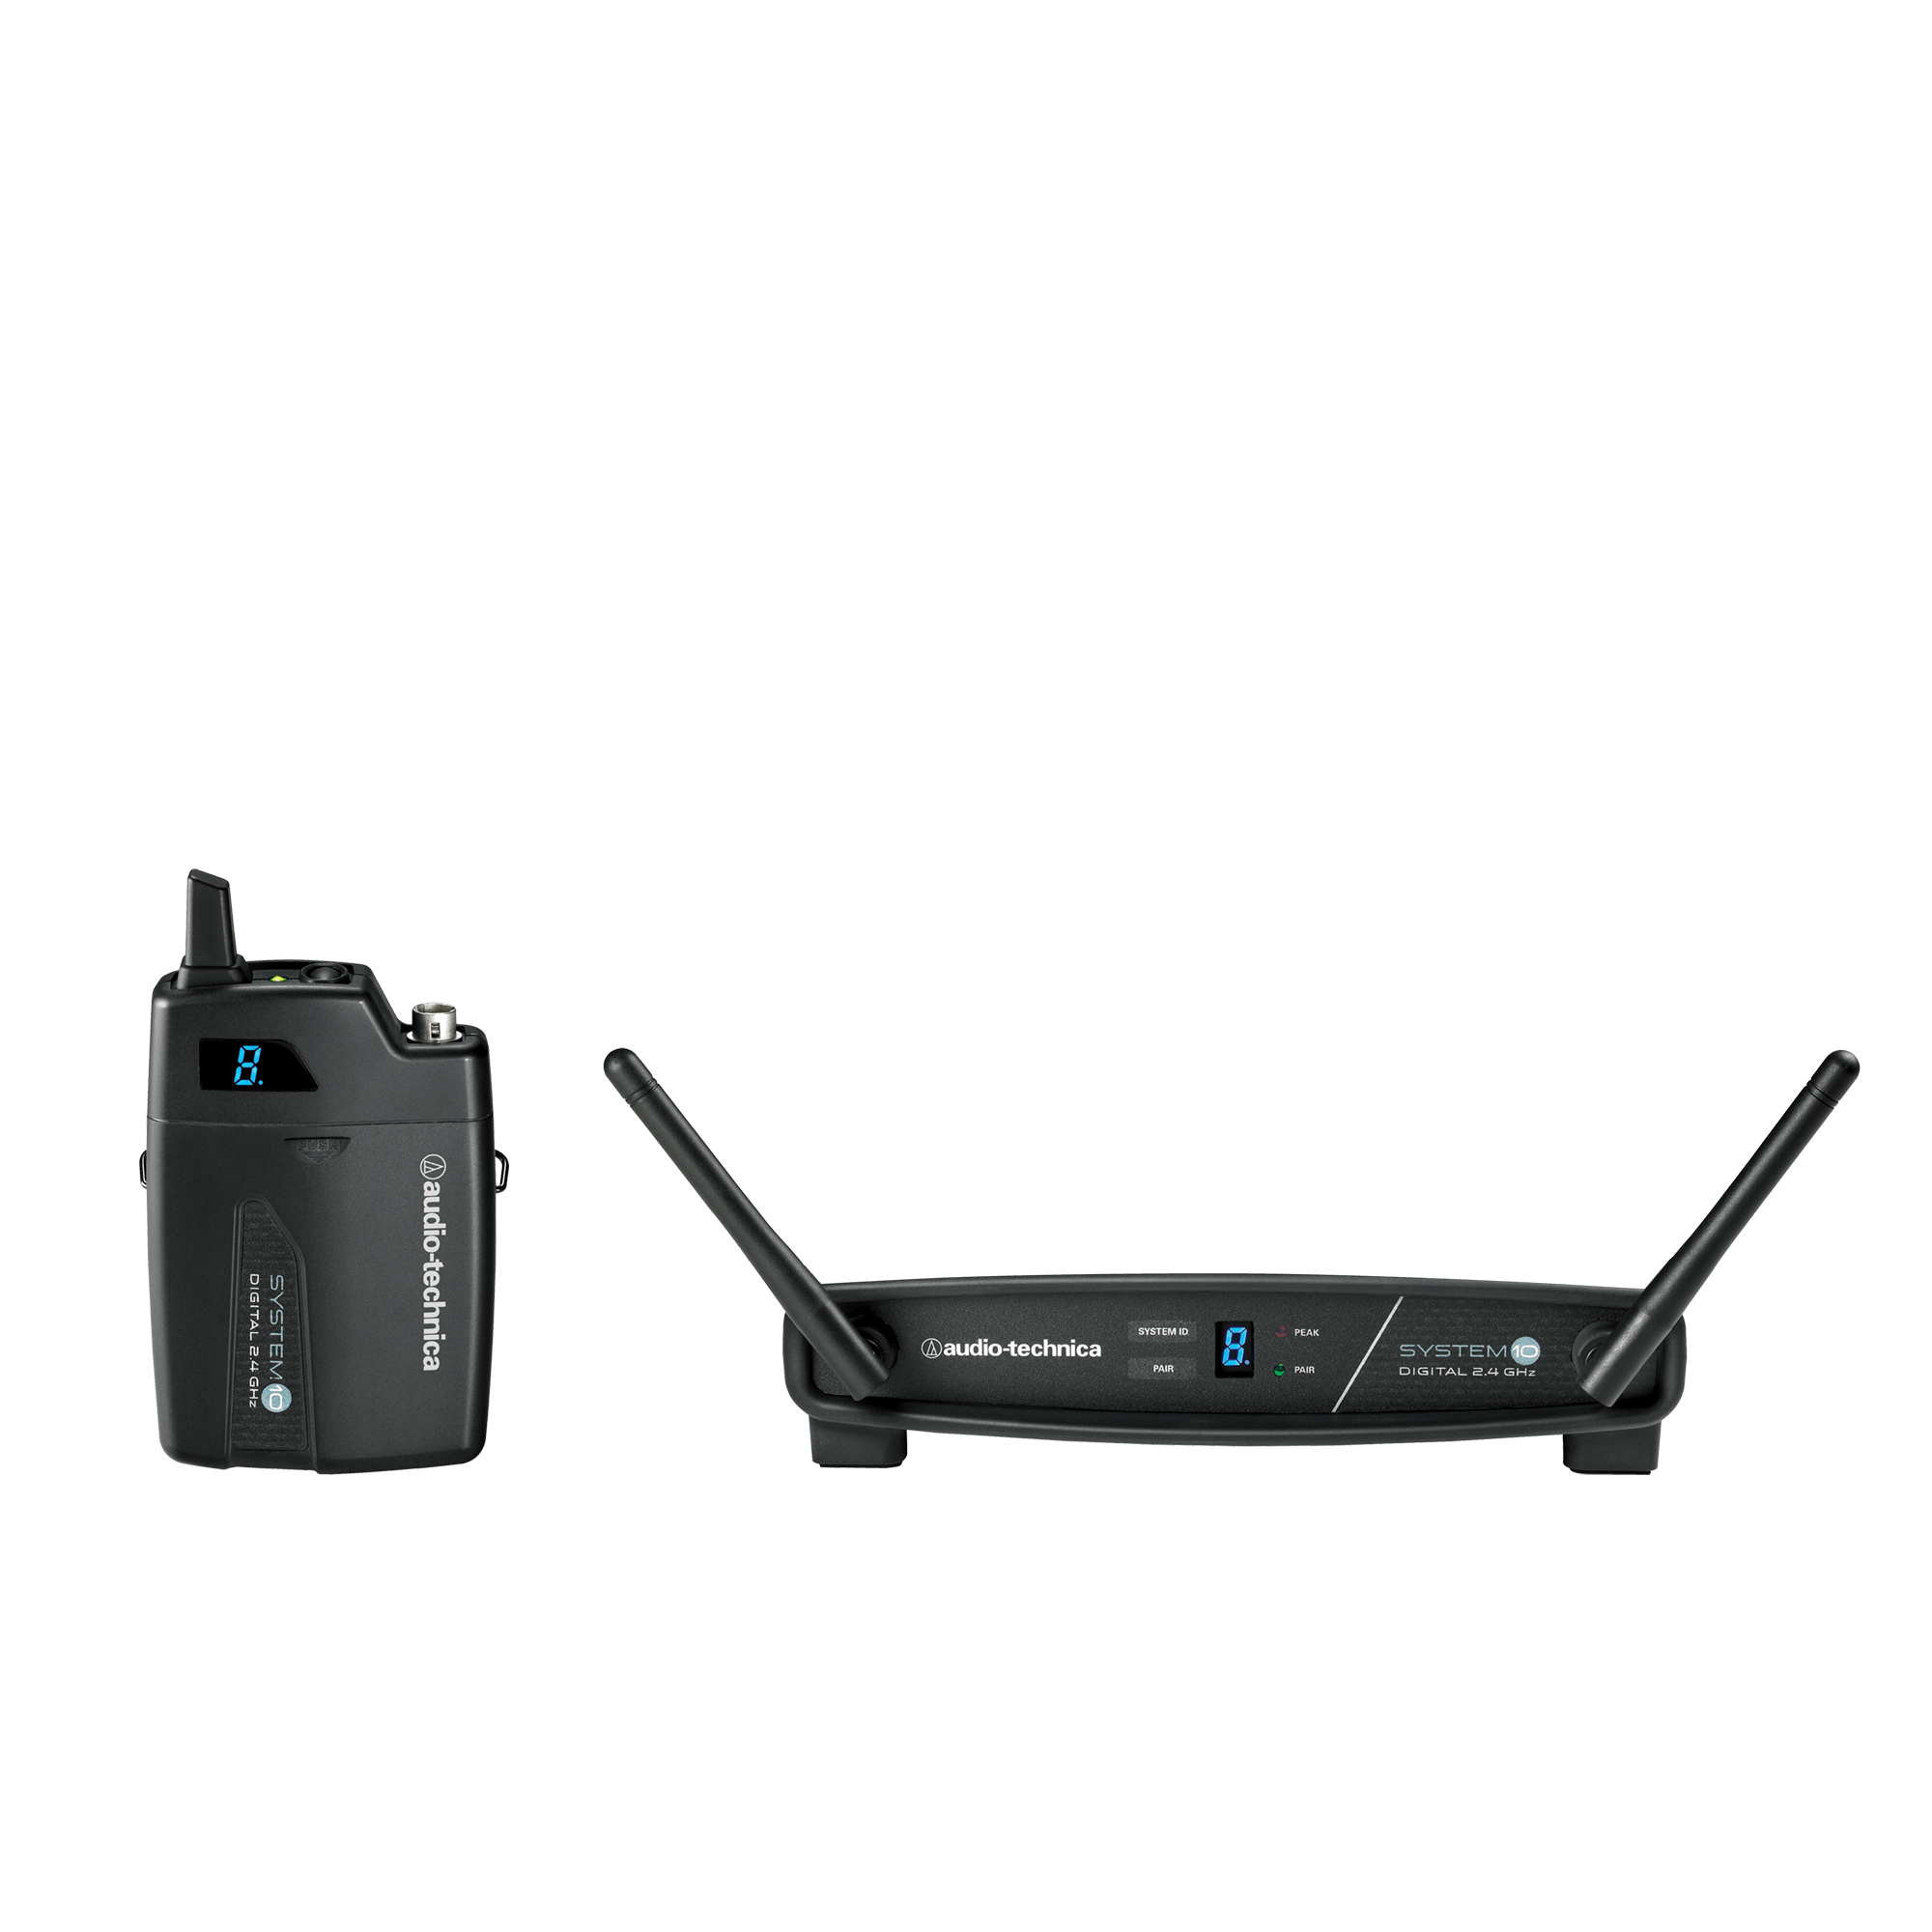 Audio-Technica ATW-1101/H System 10 Digital Wireless Headworn Dynamic Microphone Set with GM-1W Mobile Pack & 4-Hour Rapid Charger Kit